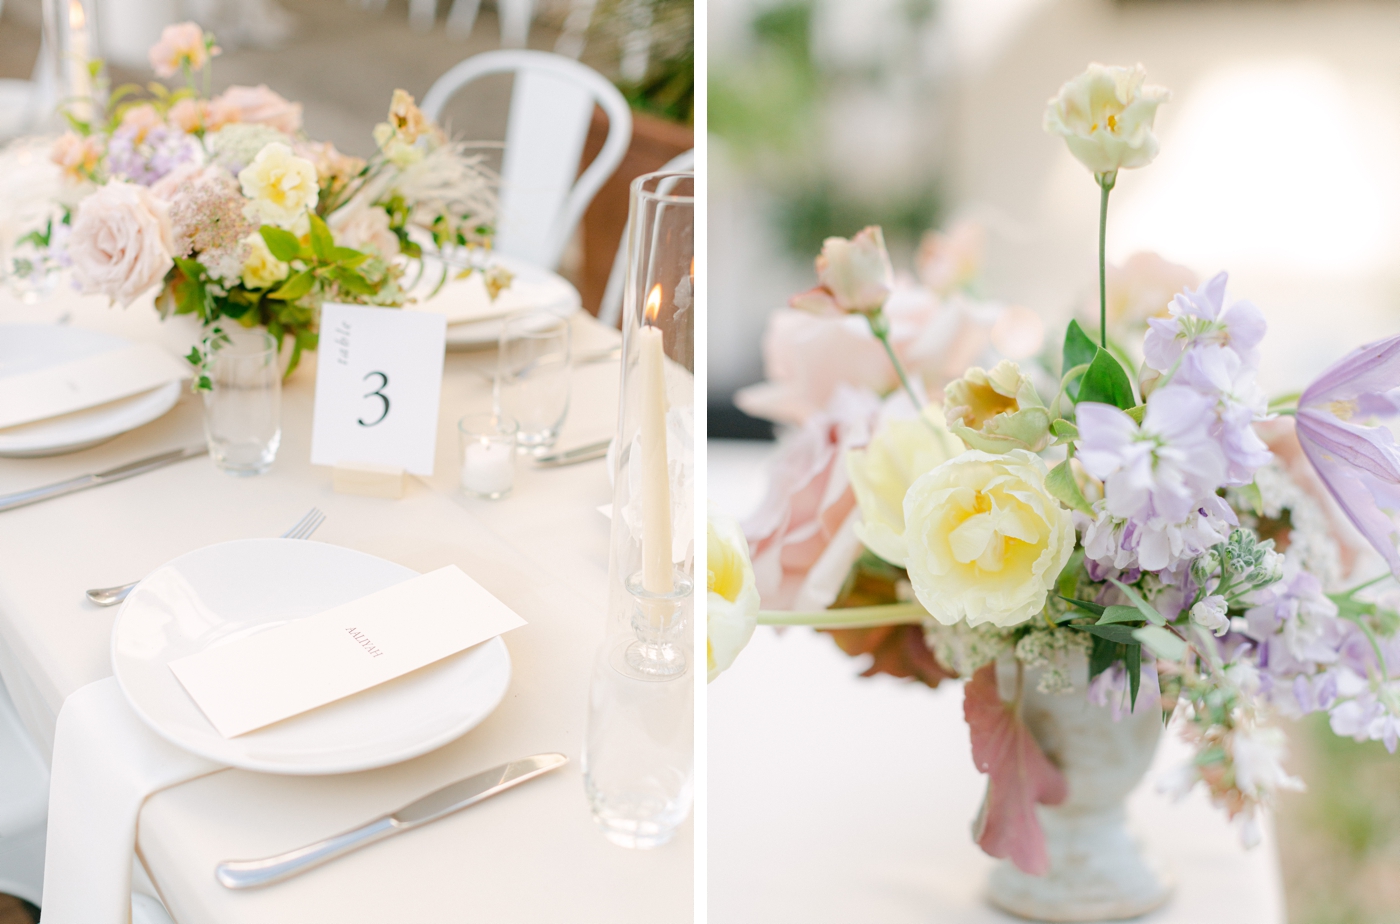 Peach, blush, and lavender reception flowers by Bough and Twig